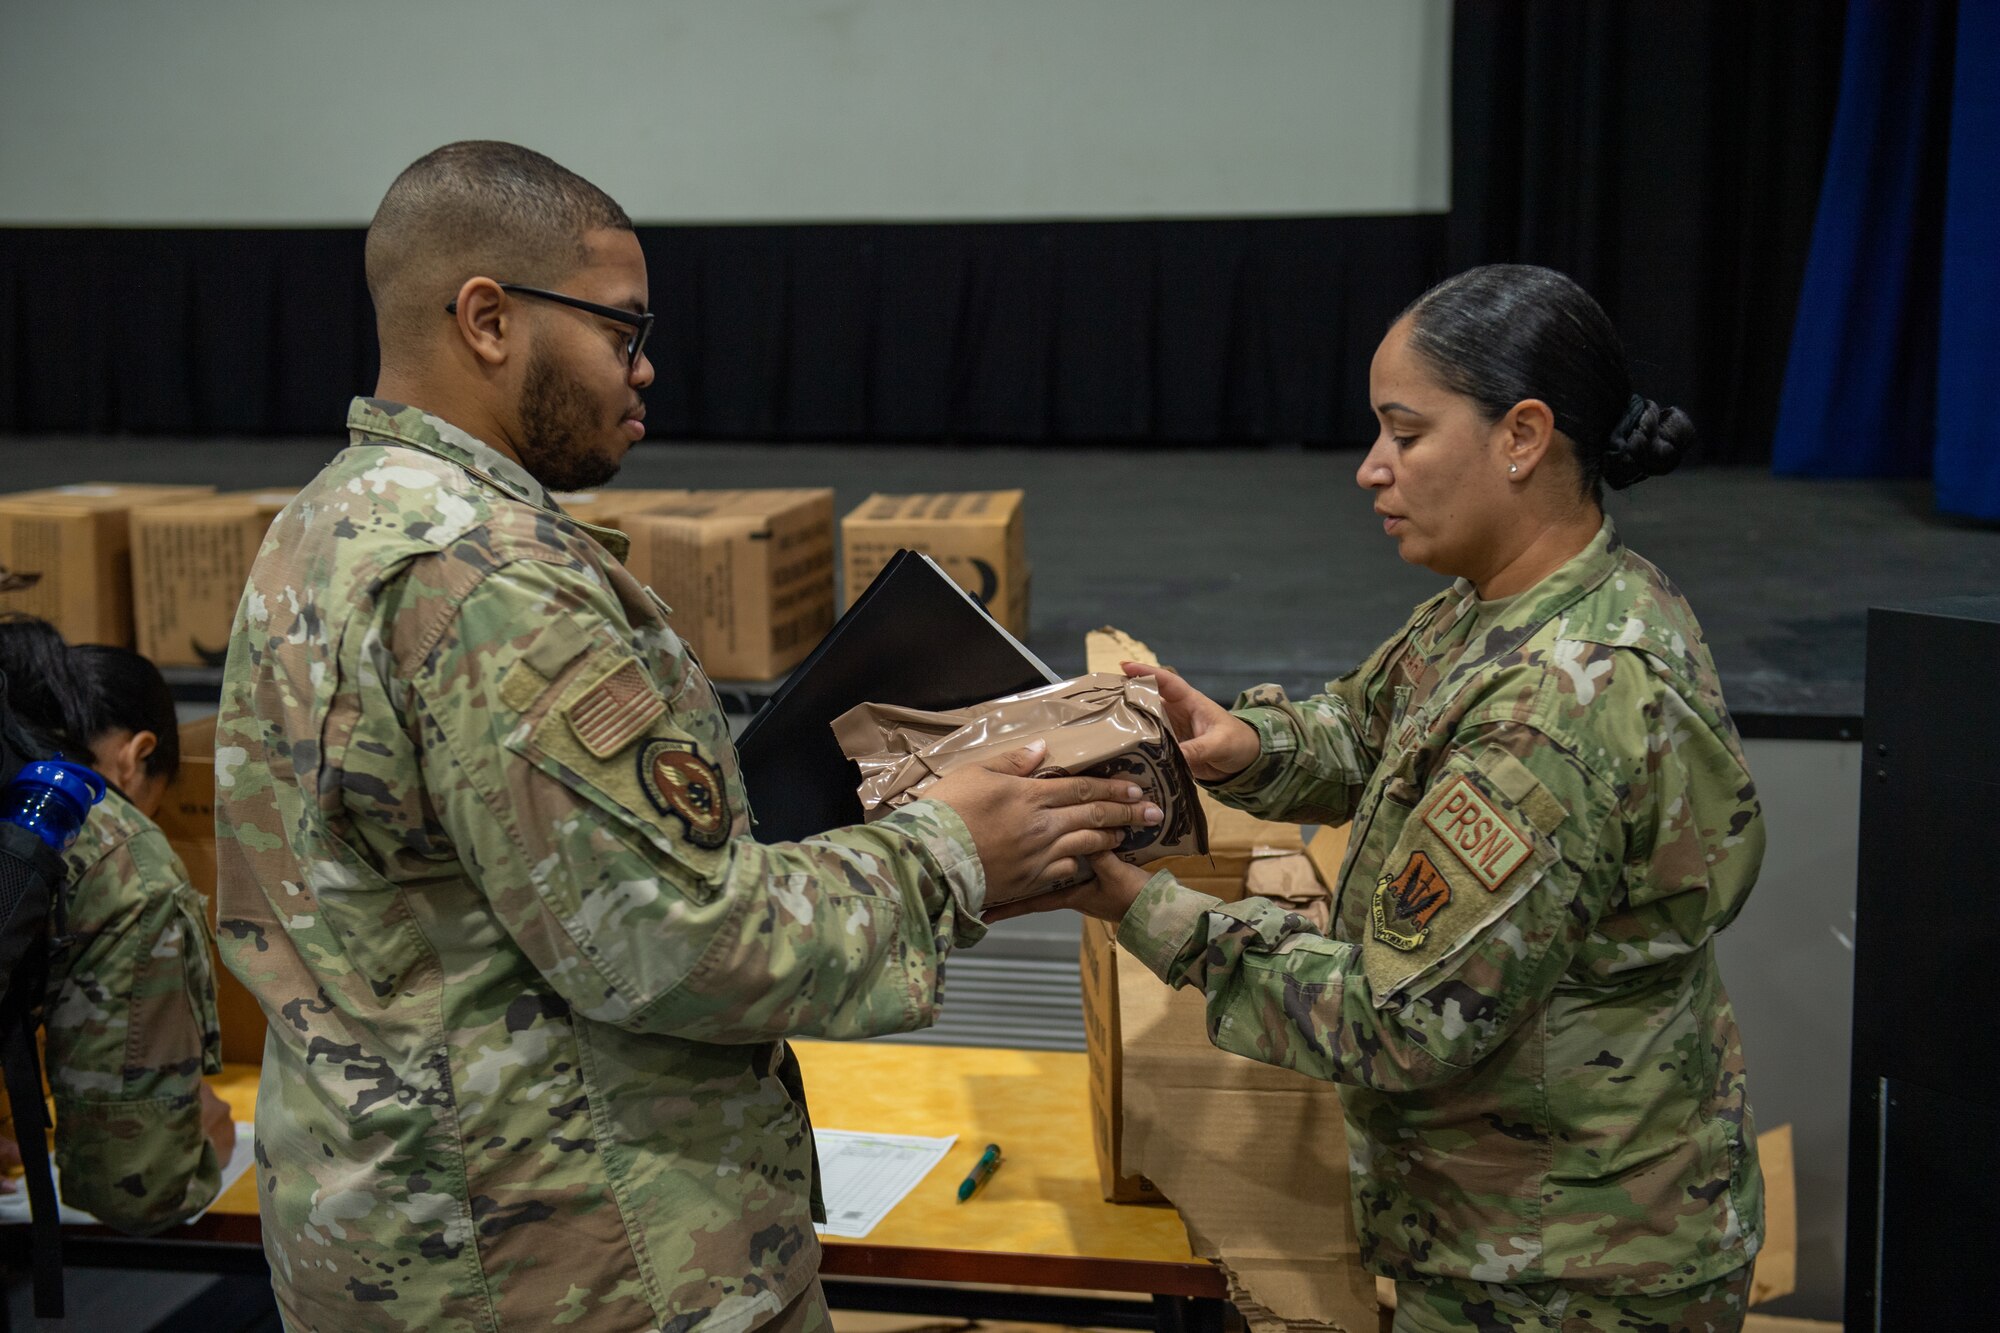 U.S. Air Force Airmen assigned to the 23rd Wing hand out Meals Ready-to-Eat in preparation for Exercise Ready Tiger 24-1 at Moody Air Force Base, Georgia, April 8, 2024. Exercise participants were given MREs which are self-contained operational rations consisting of a full meal packed in a flexible meal bag.  (U.S. Air Force photo by Airman Cade Ellis)